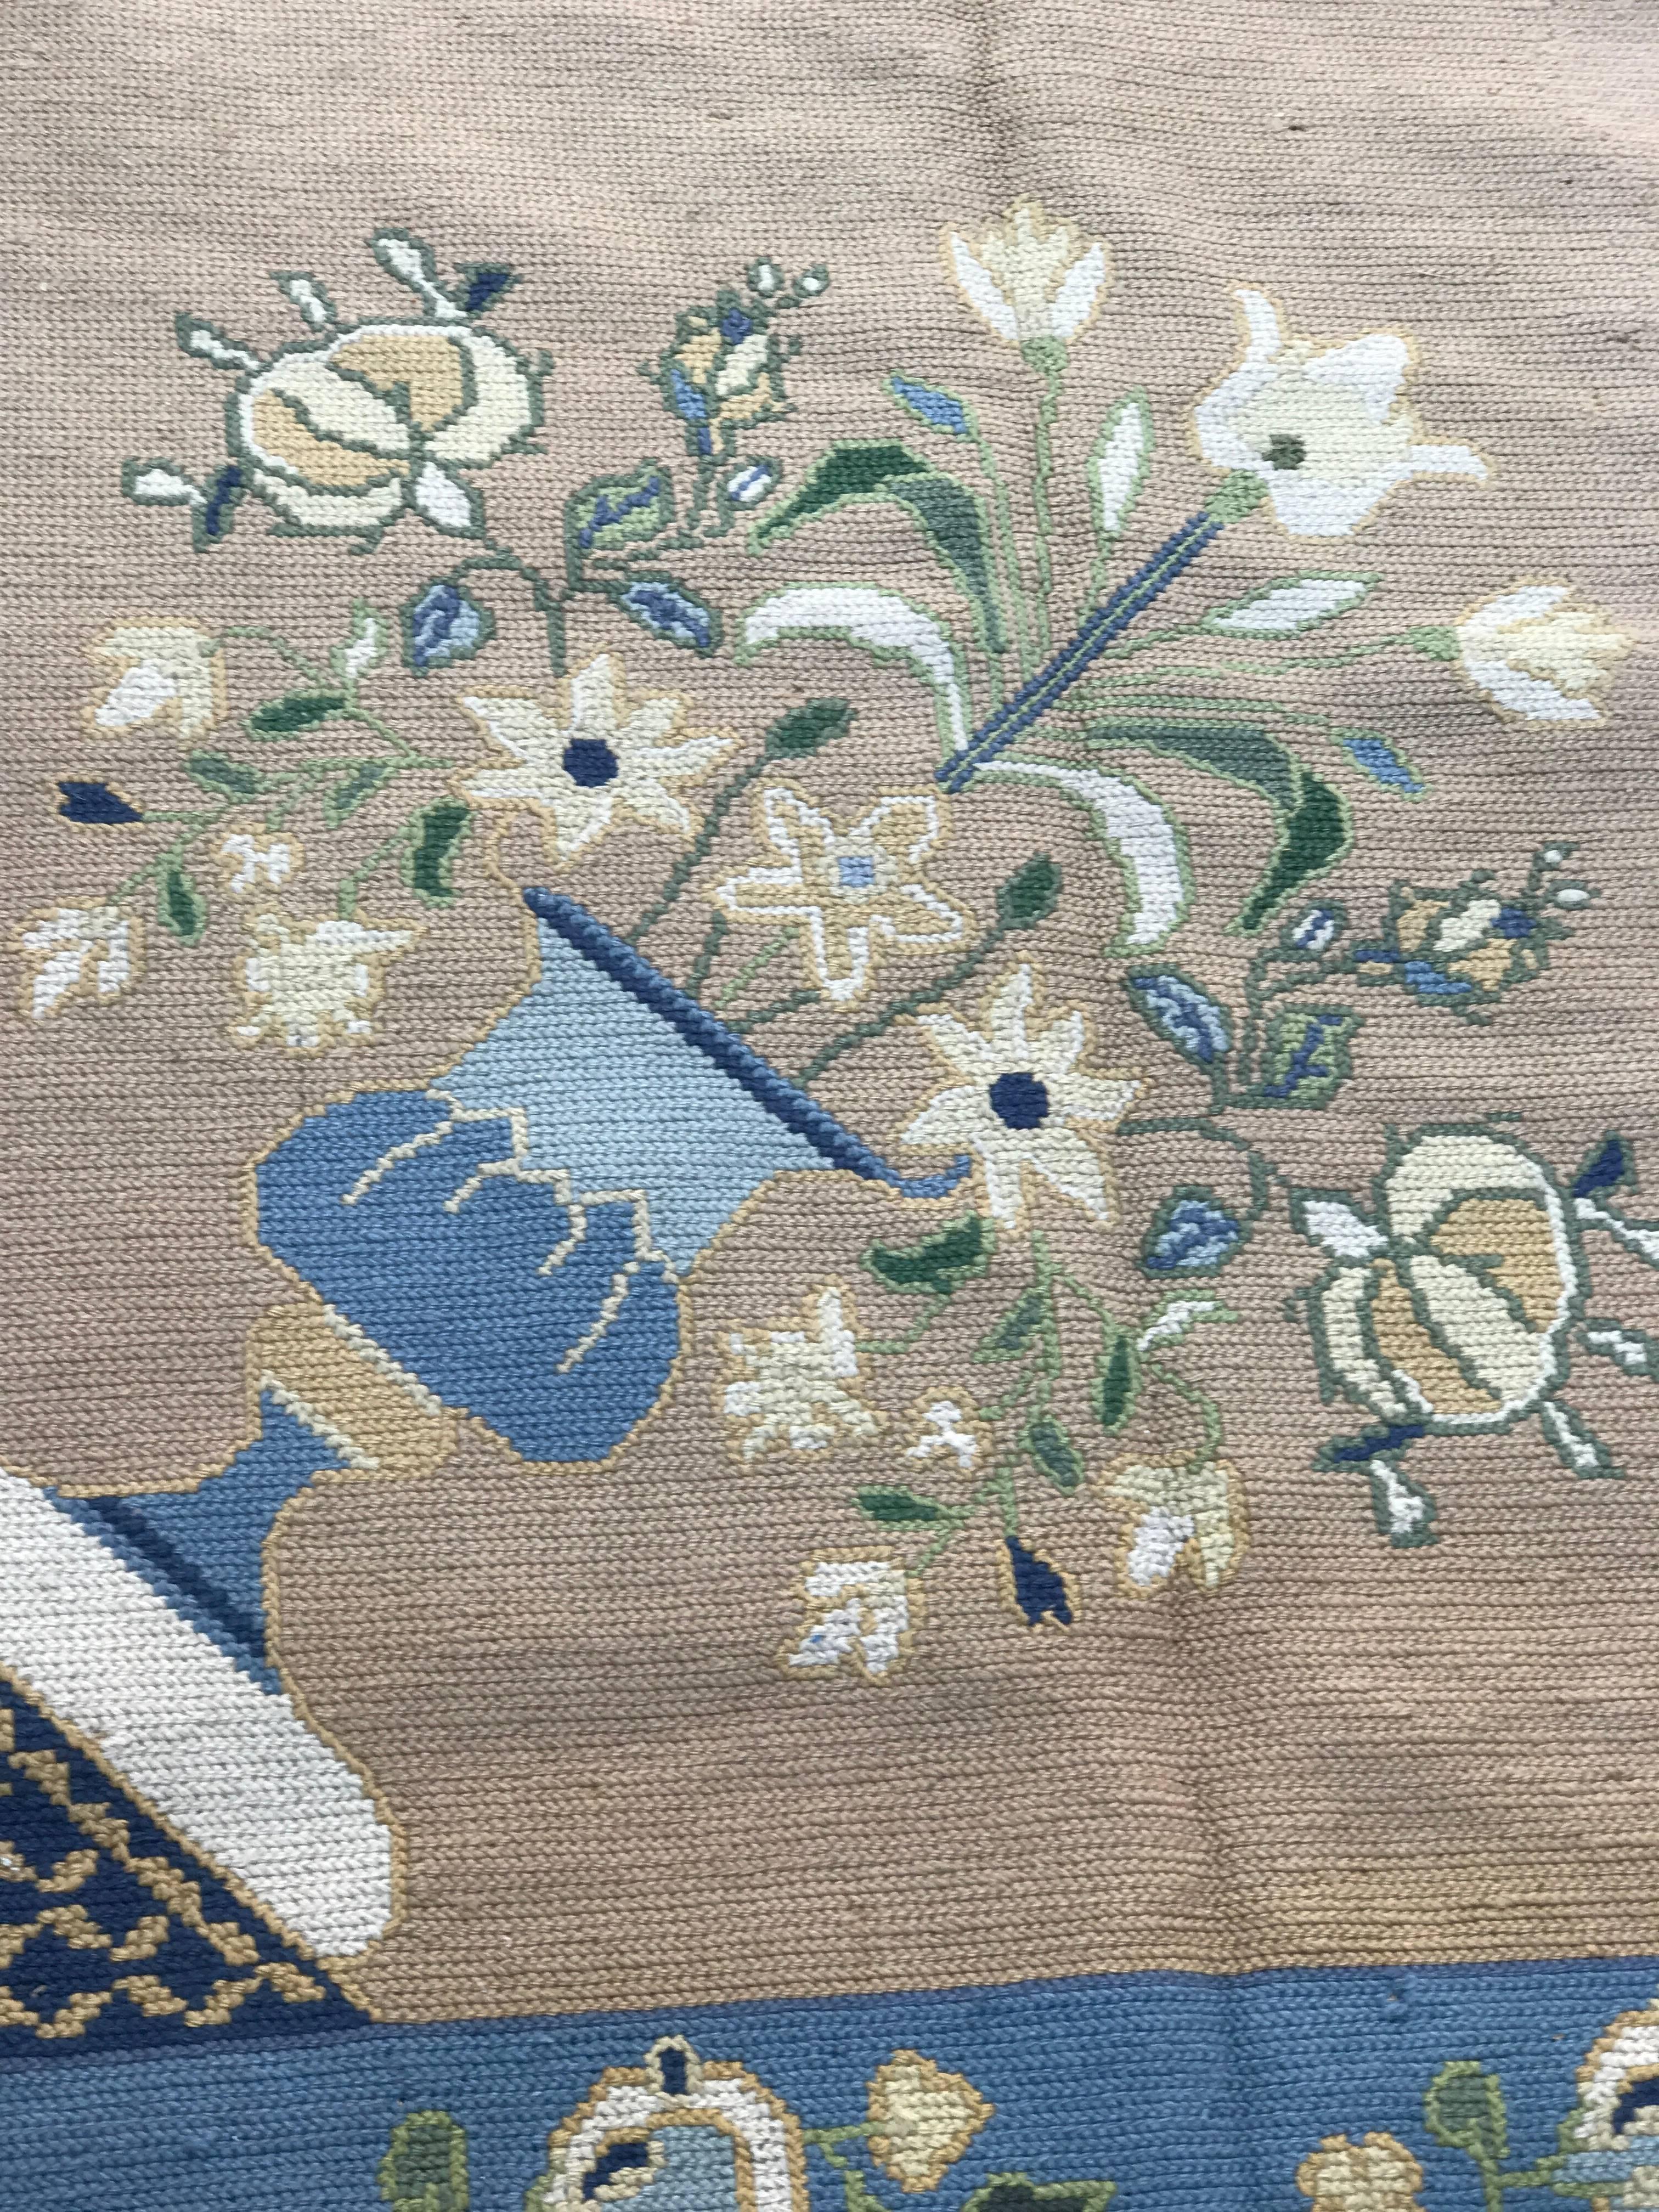 Light pastel blue and beige Portuguese carpet. Interlaced flowers and garlands make up the design of the central field and other decorative elements. This carpet is ideal for a large living room.
Very good condition.